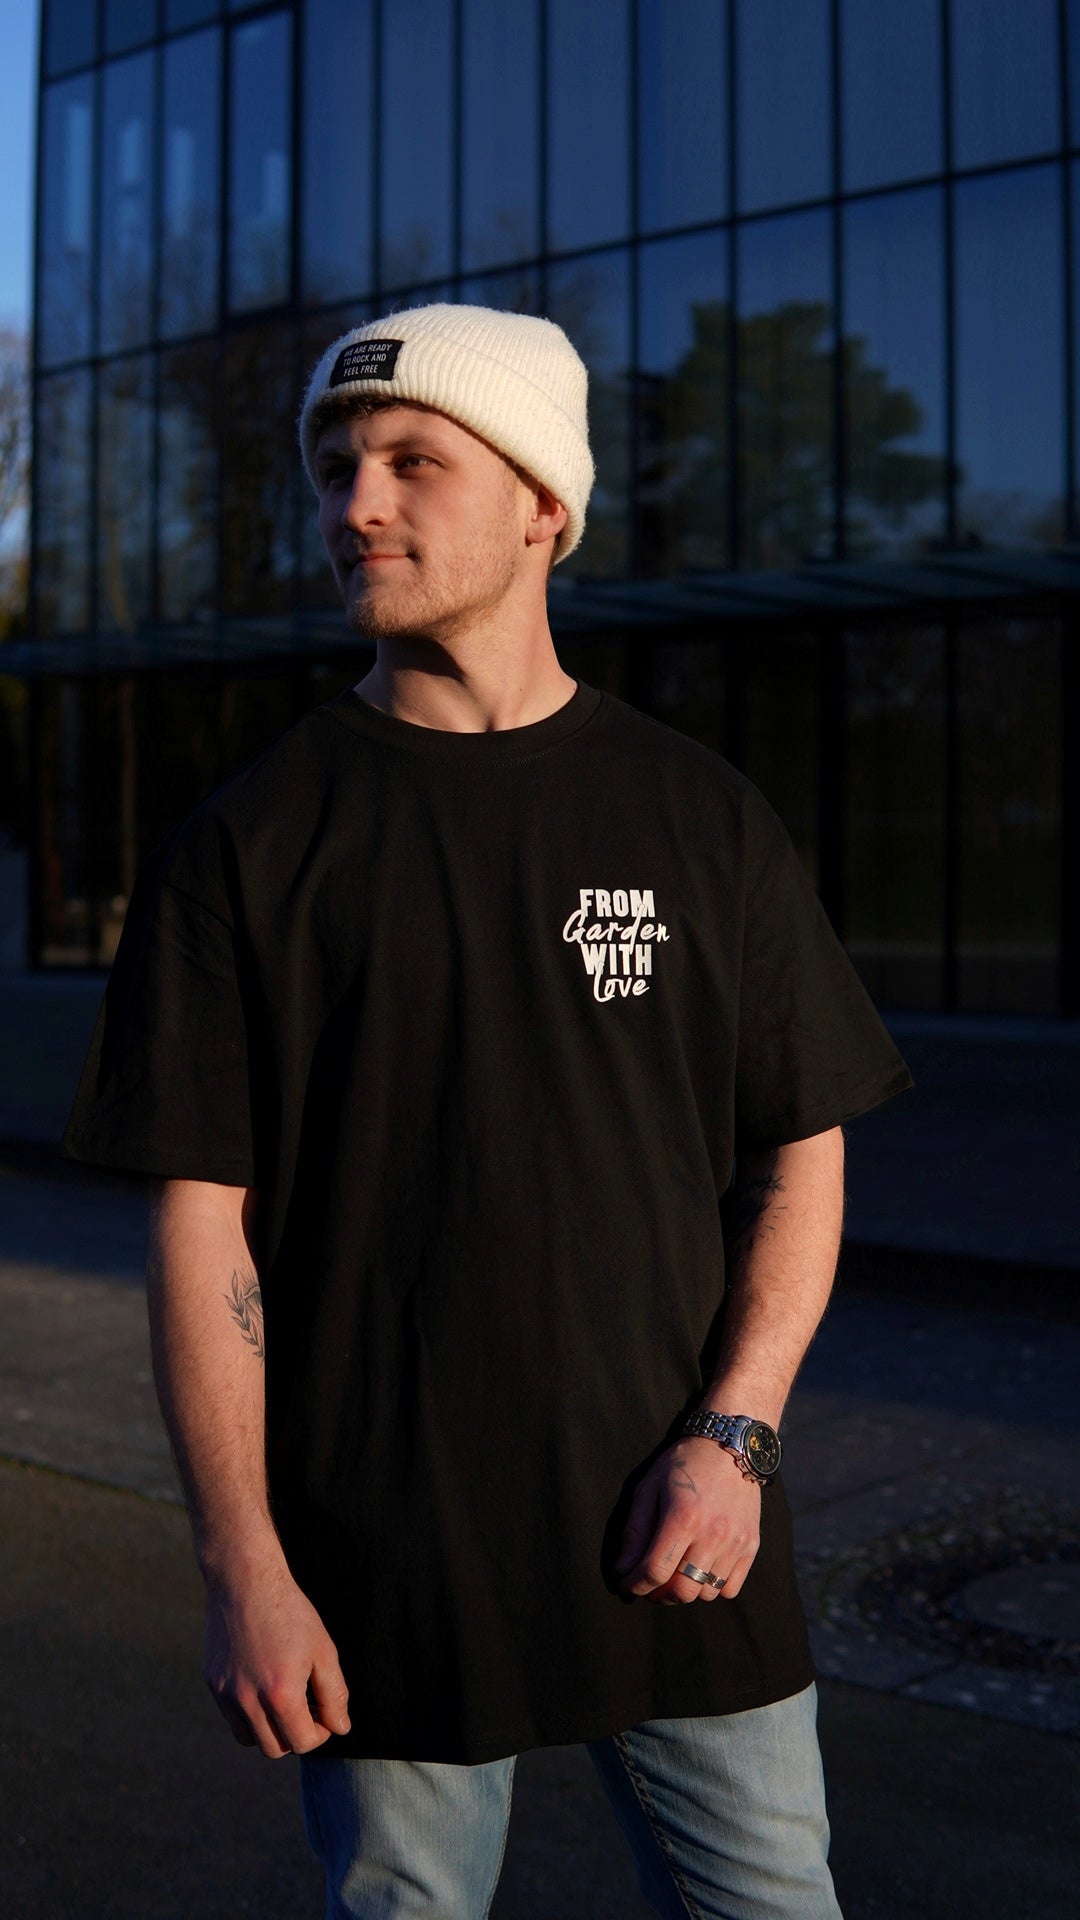 WTMG T-Shirt - "From Garden With Love" - Oversized